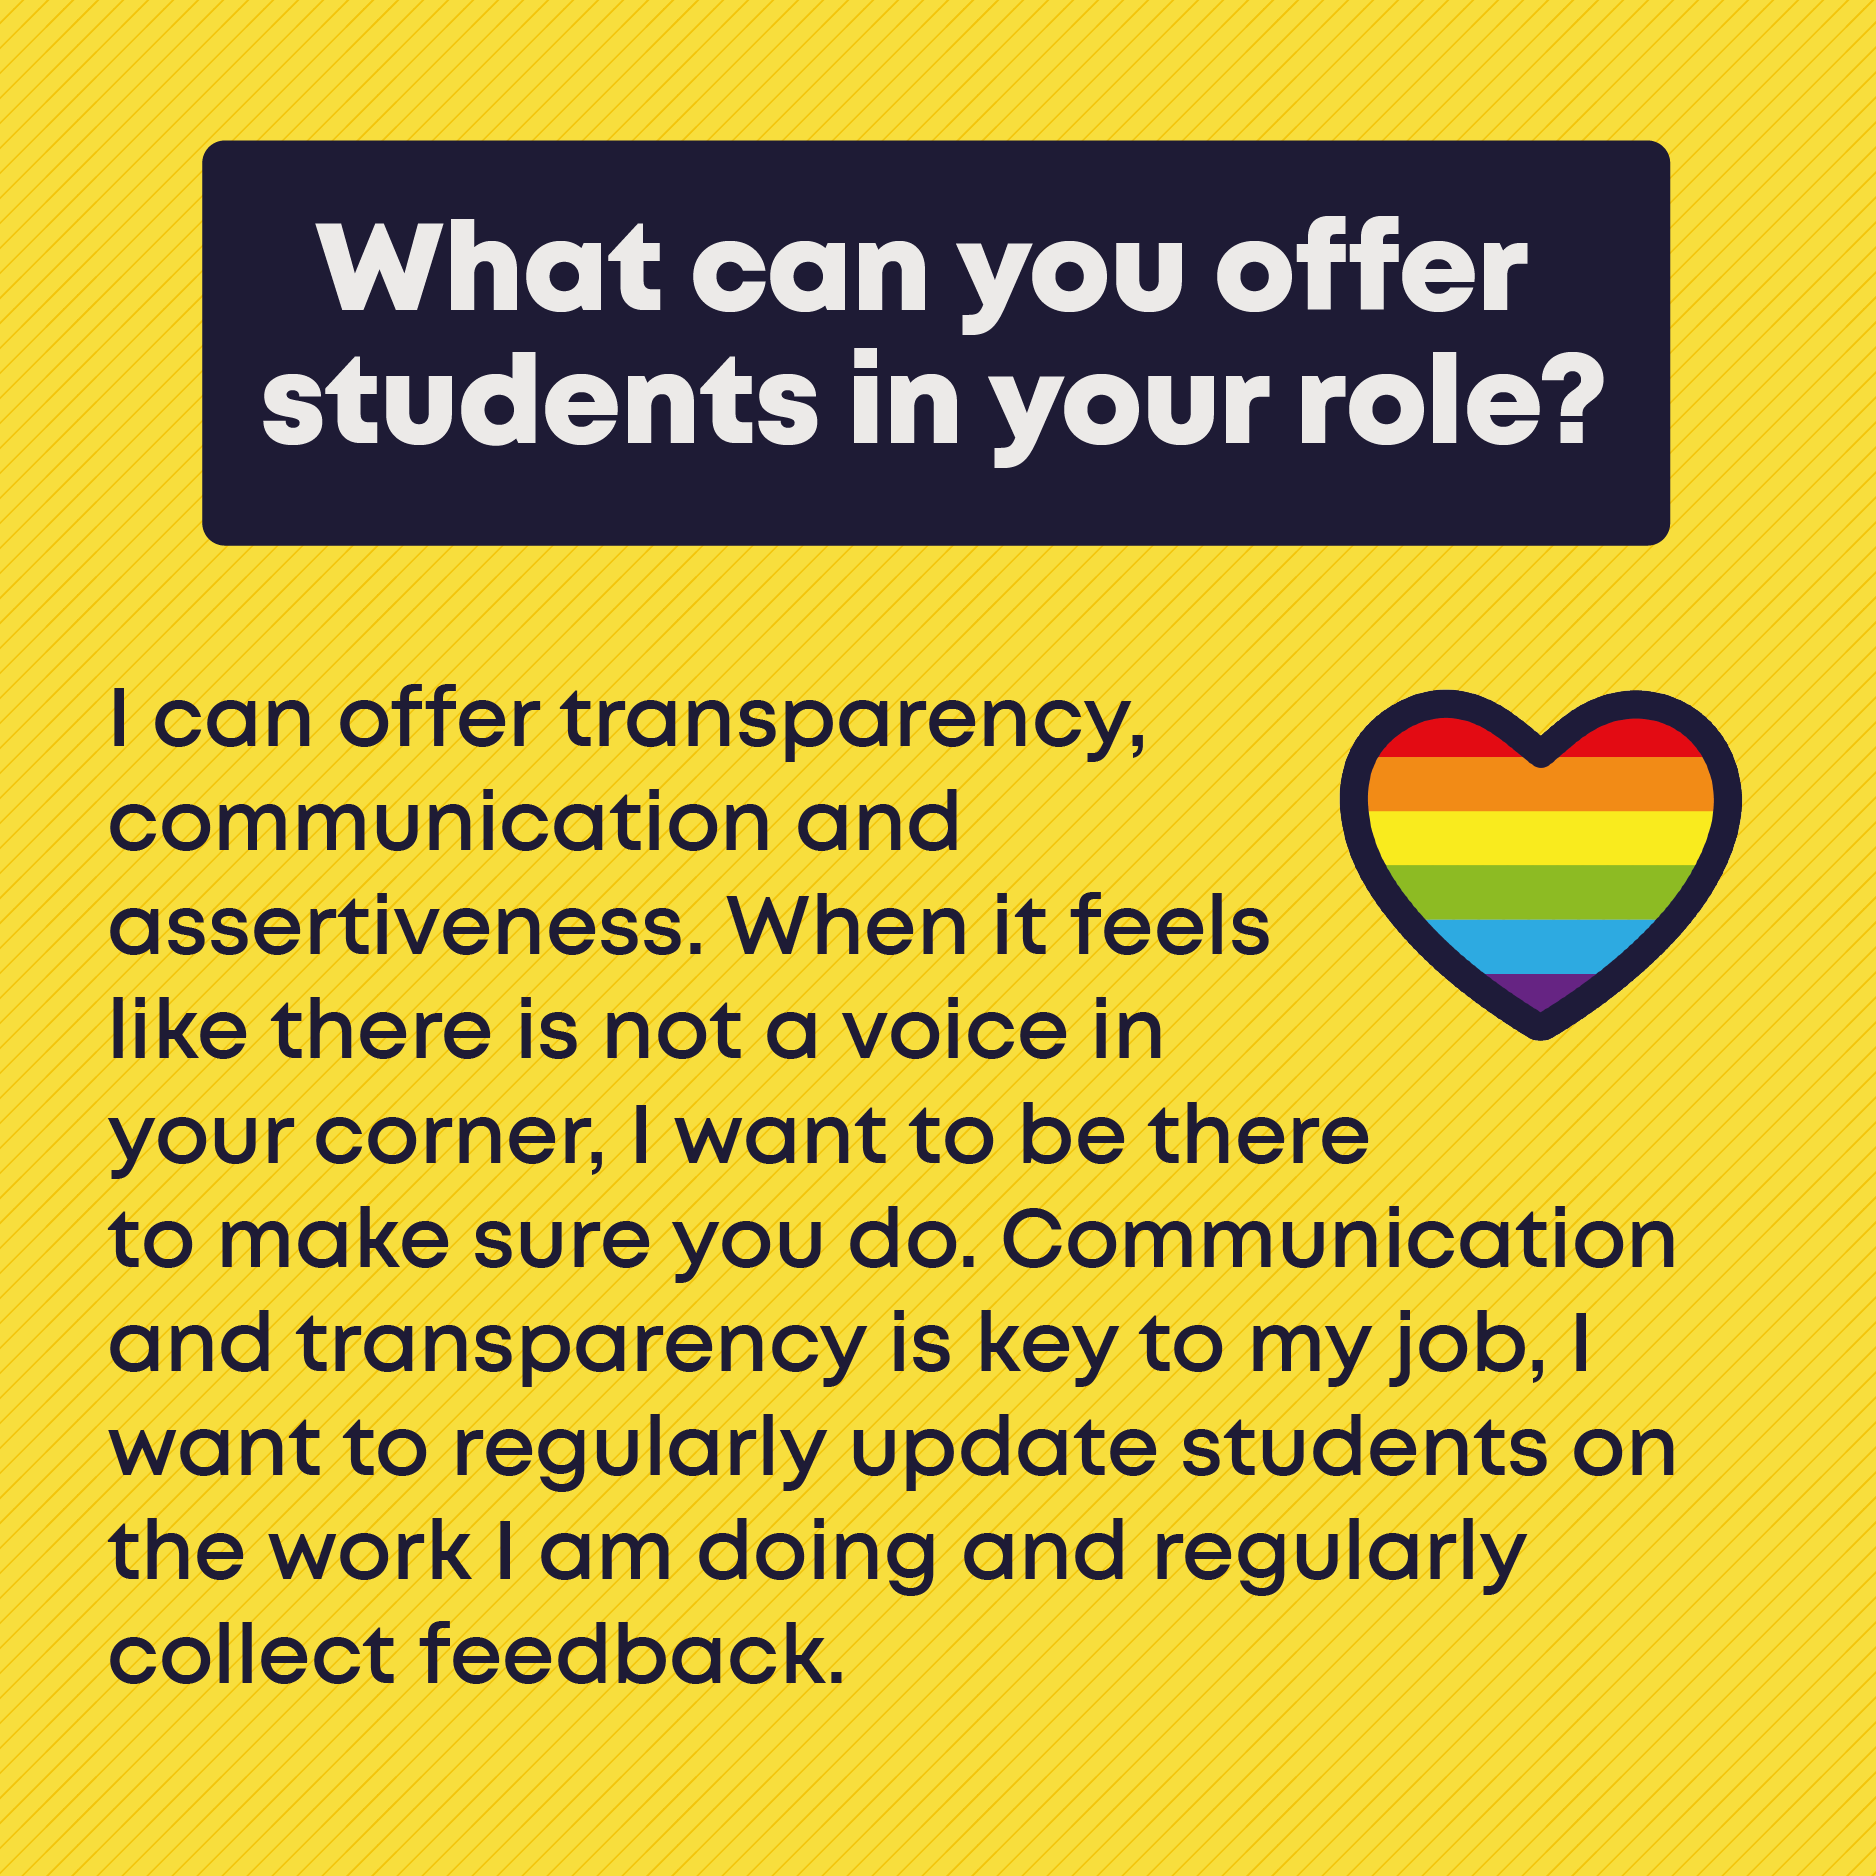 What can you offer students in your role? I can offer transparency, communication and  assertiveness. When it feels  like there is not a voice in  your corner, I want to be there  to make sure you do. Communication and transparency is key to my job, I want to regularly update students on the work I am doing and regularly collect feedback.